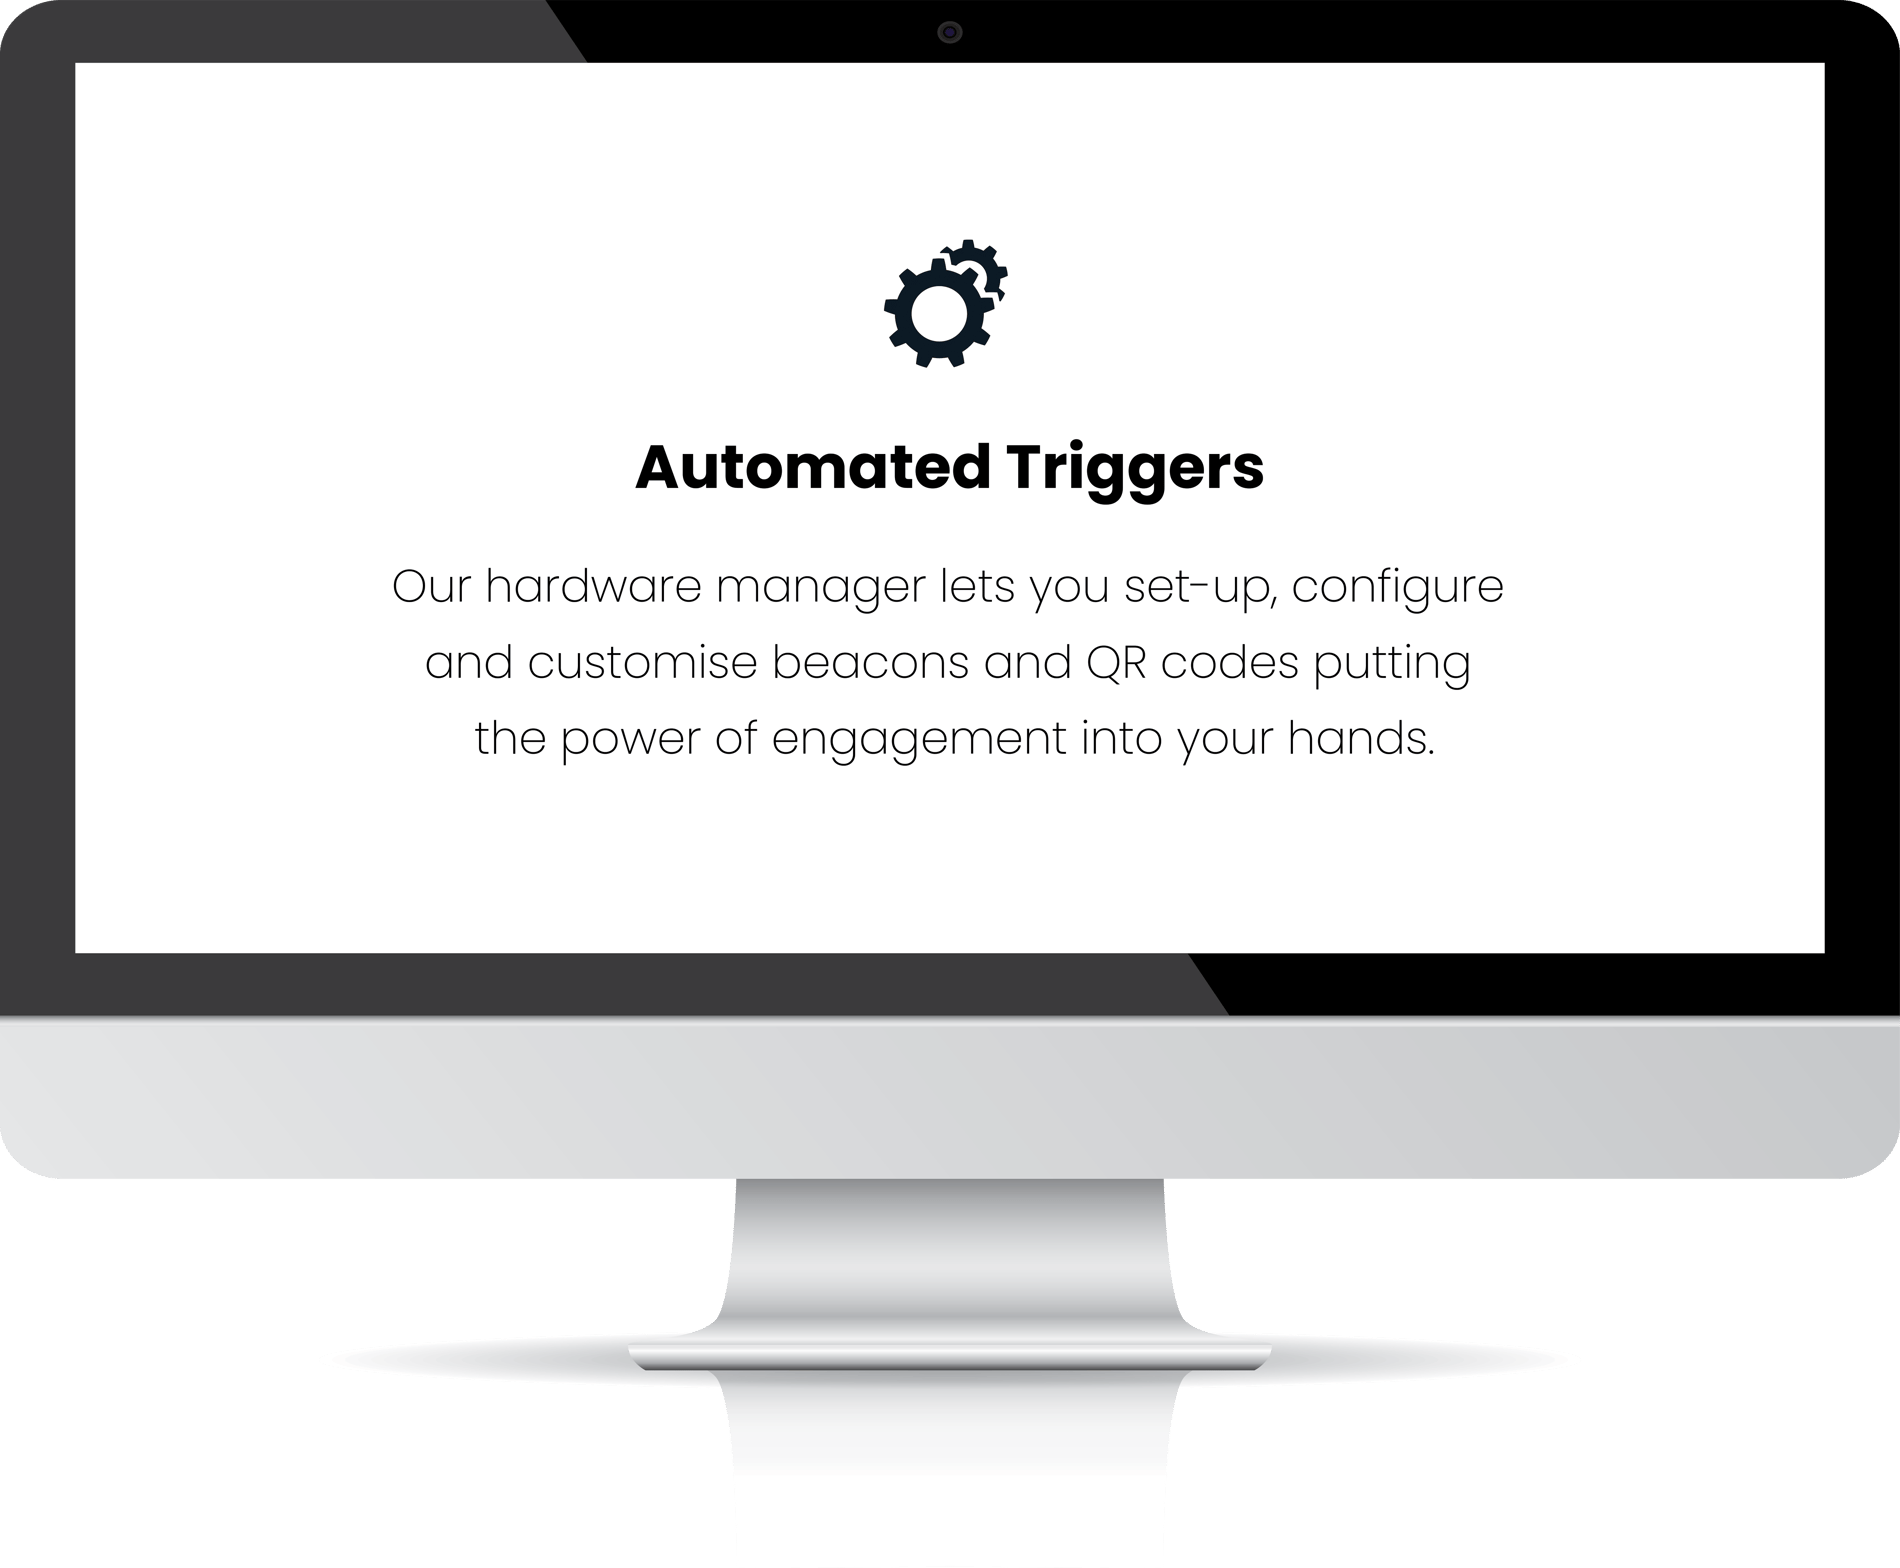 Automated Triggers